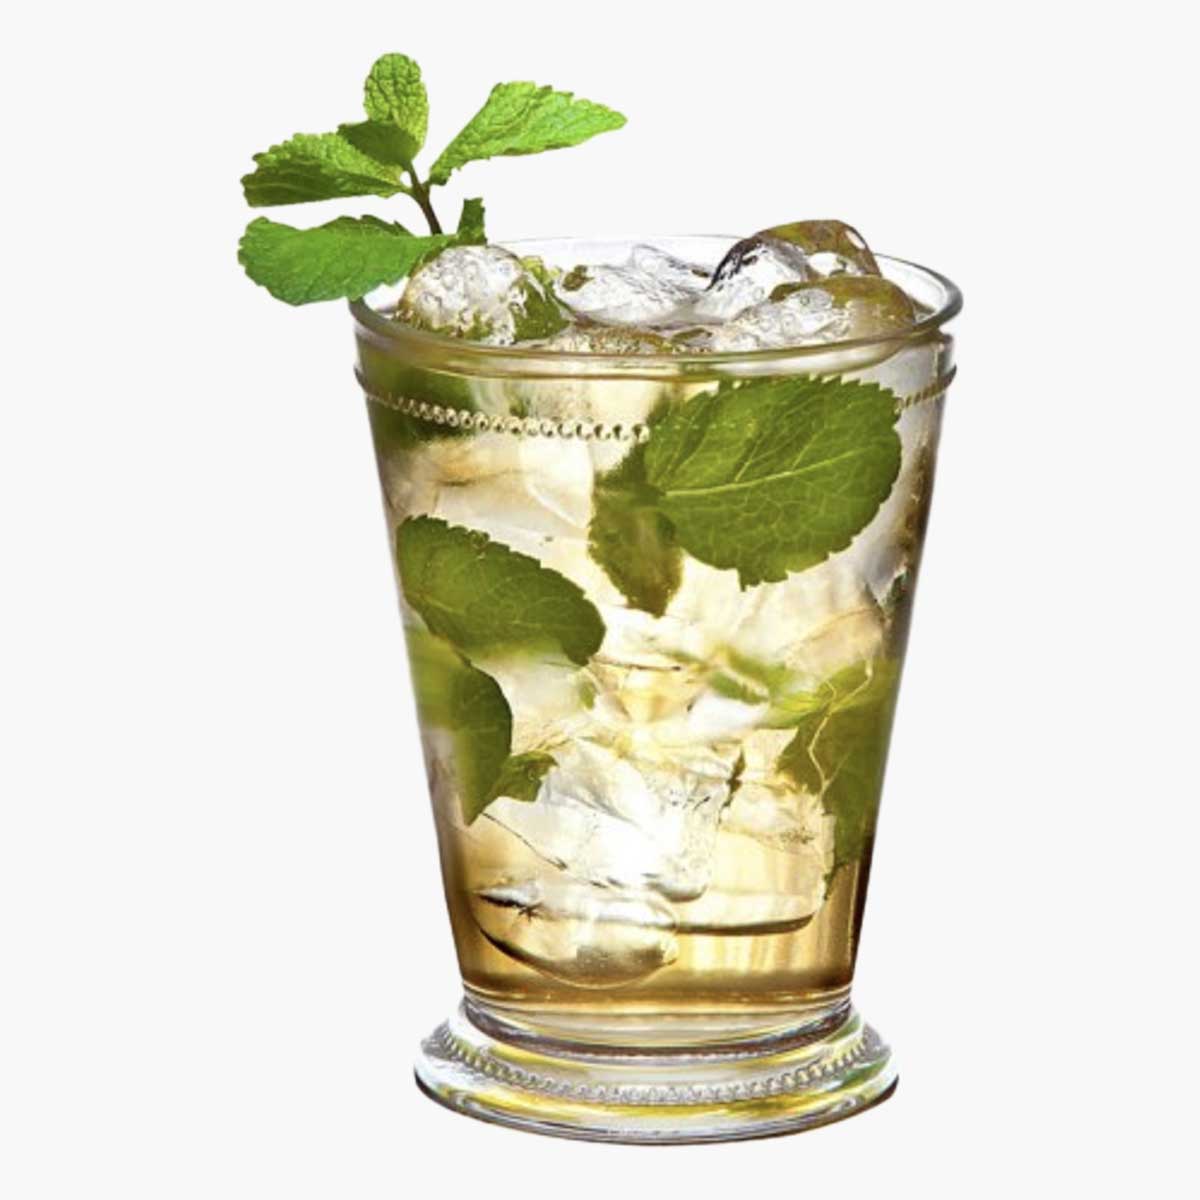 A crystal mint julep cup filled with ice, mint, and liquid.